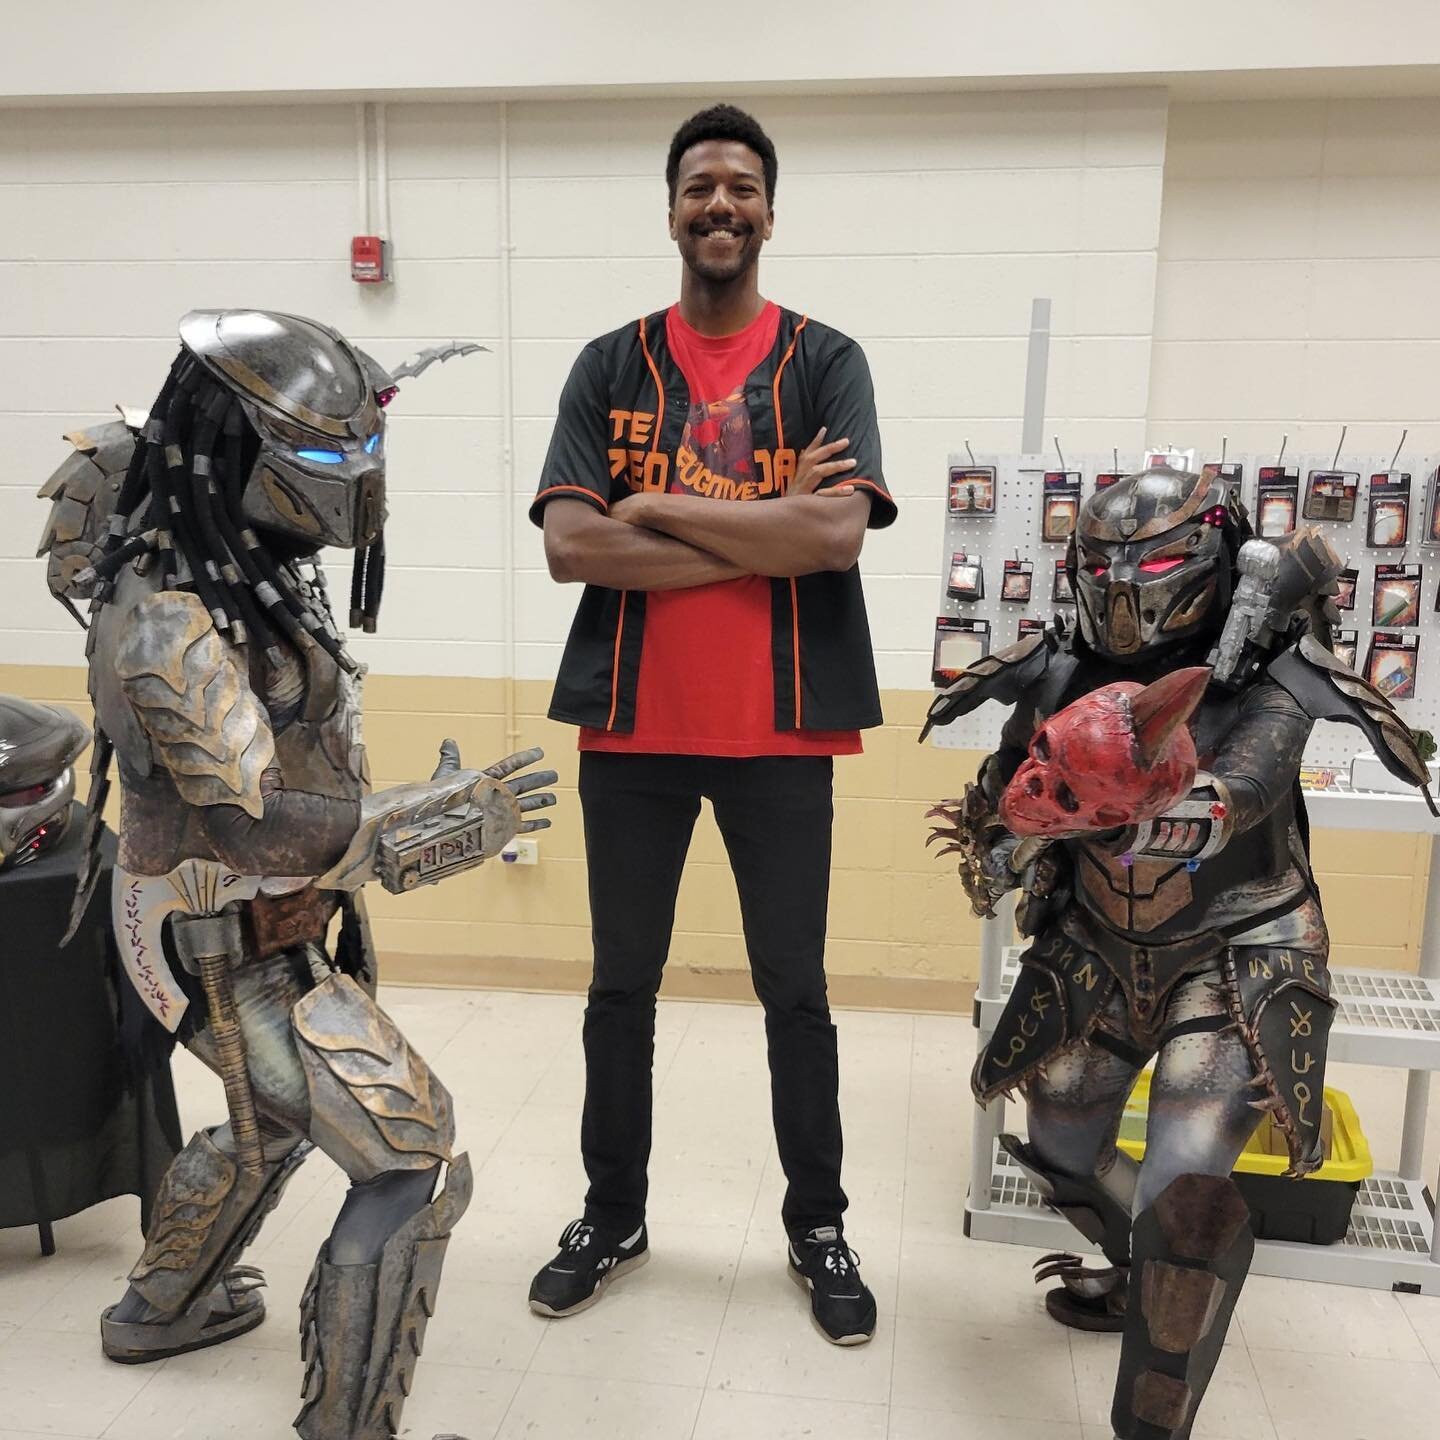 Had such a great time at the Meadowlark Comic Con last week! It was such a great show filled with wonderful staff and lovely attendees. I felt taken care of and also got to connect with many great fans of the Predator universe. Beyond humbled that I 